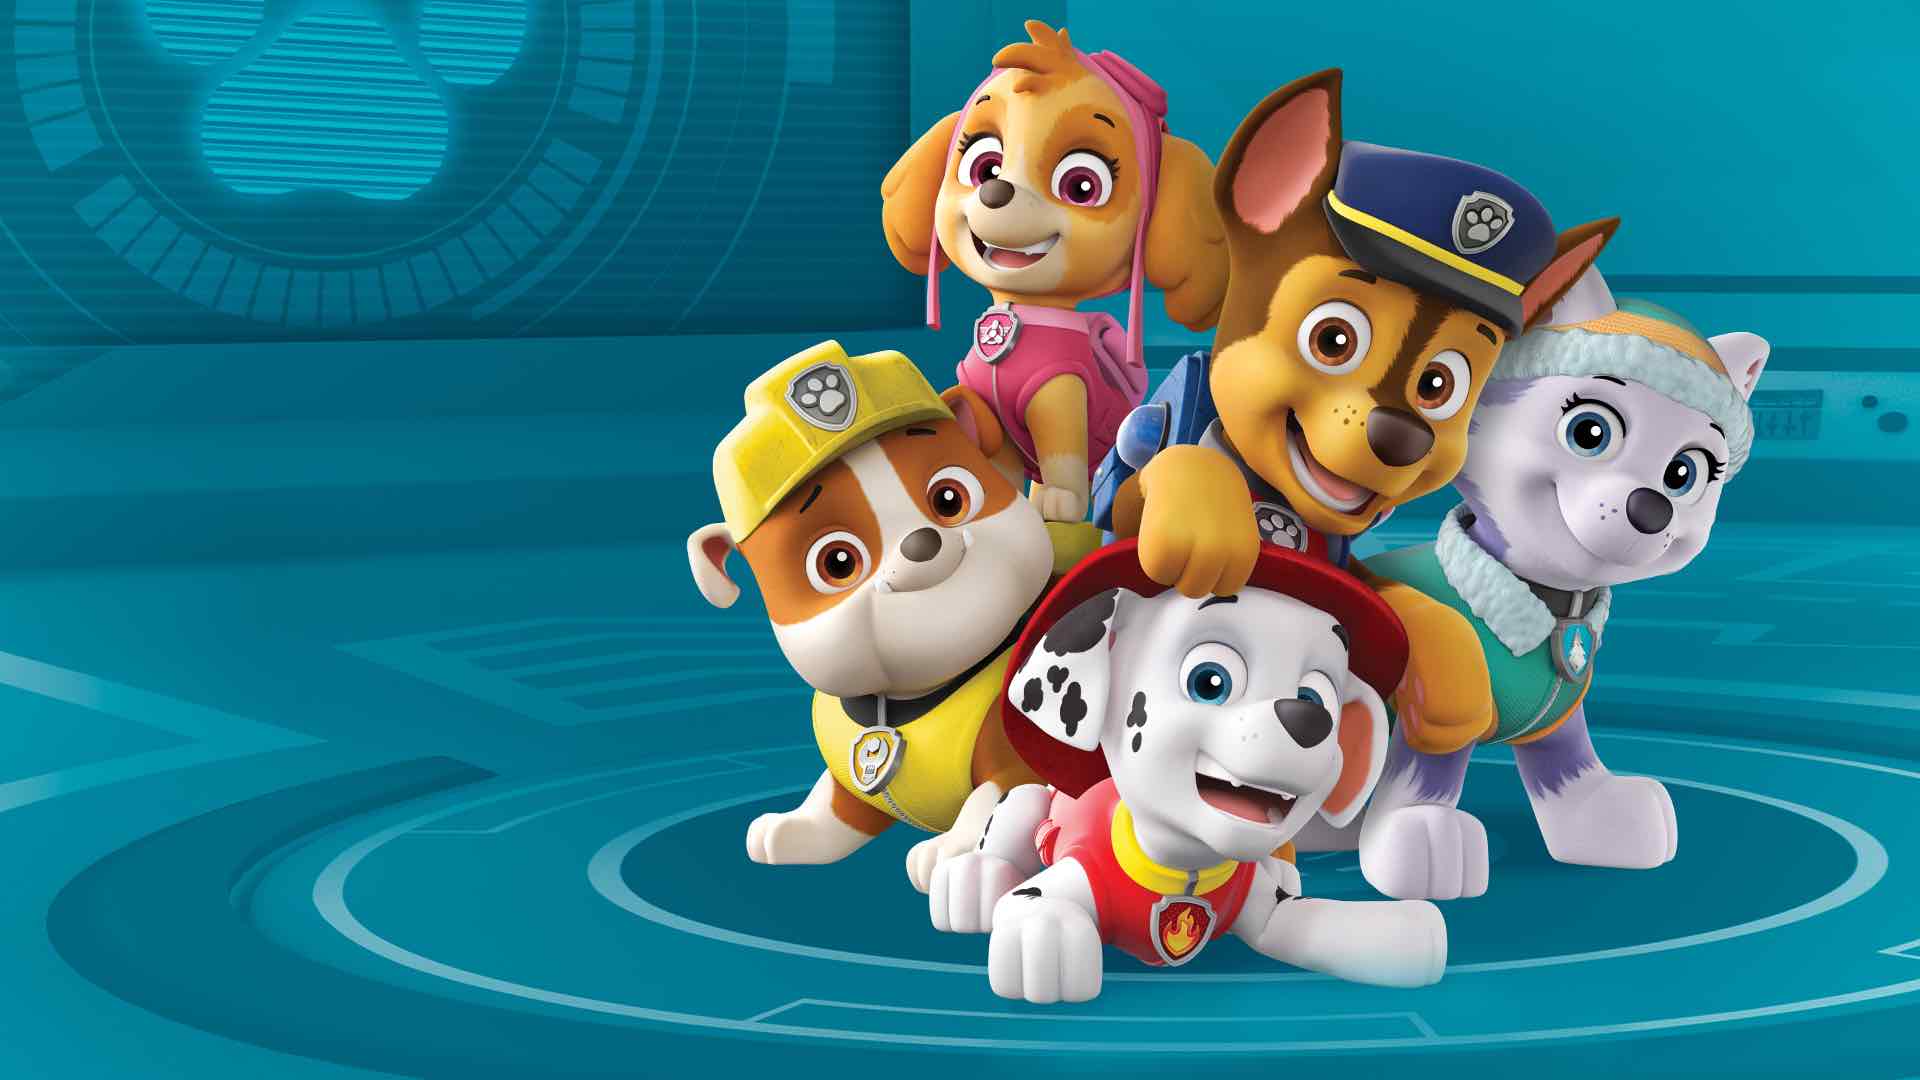 Is PAW Patrol Good for Kids?